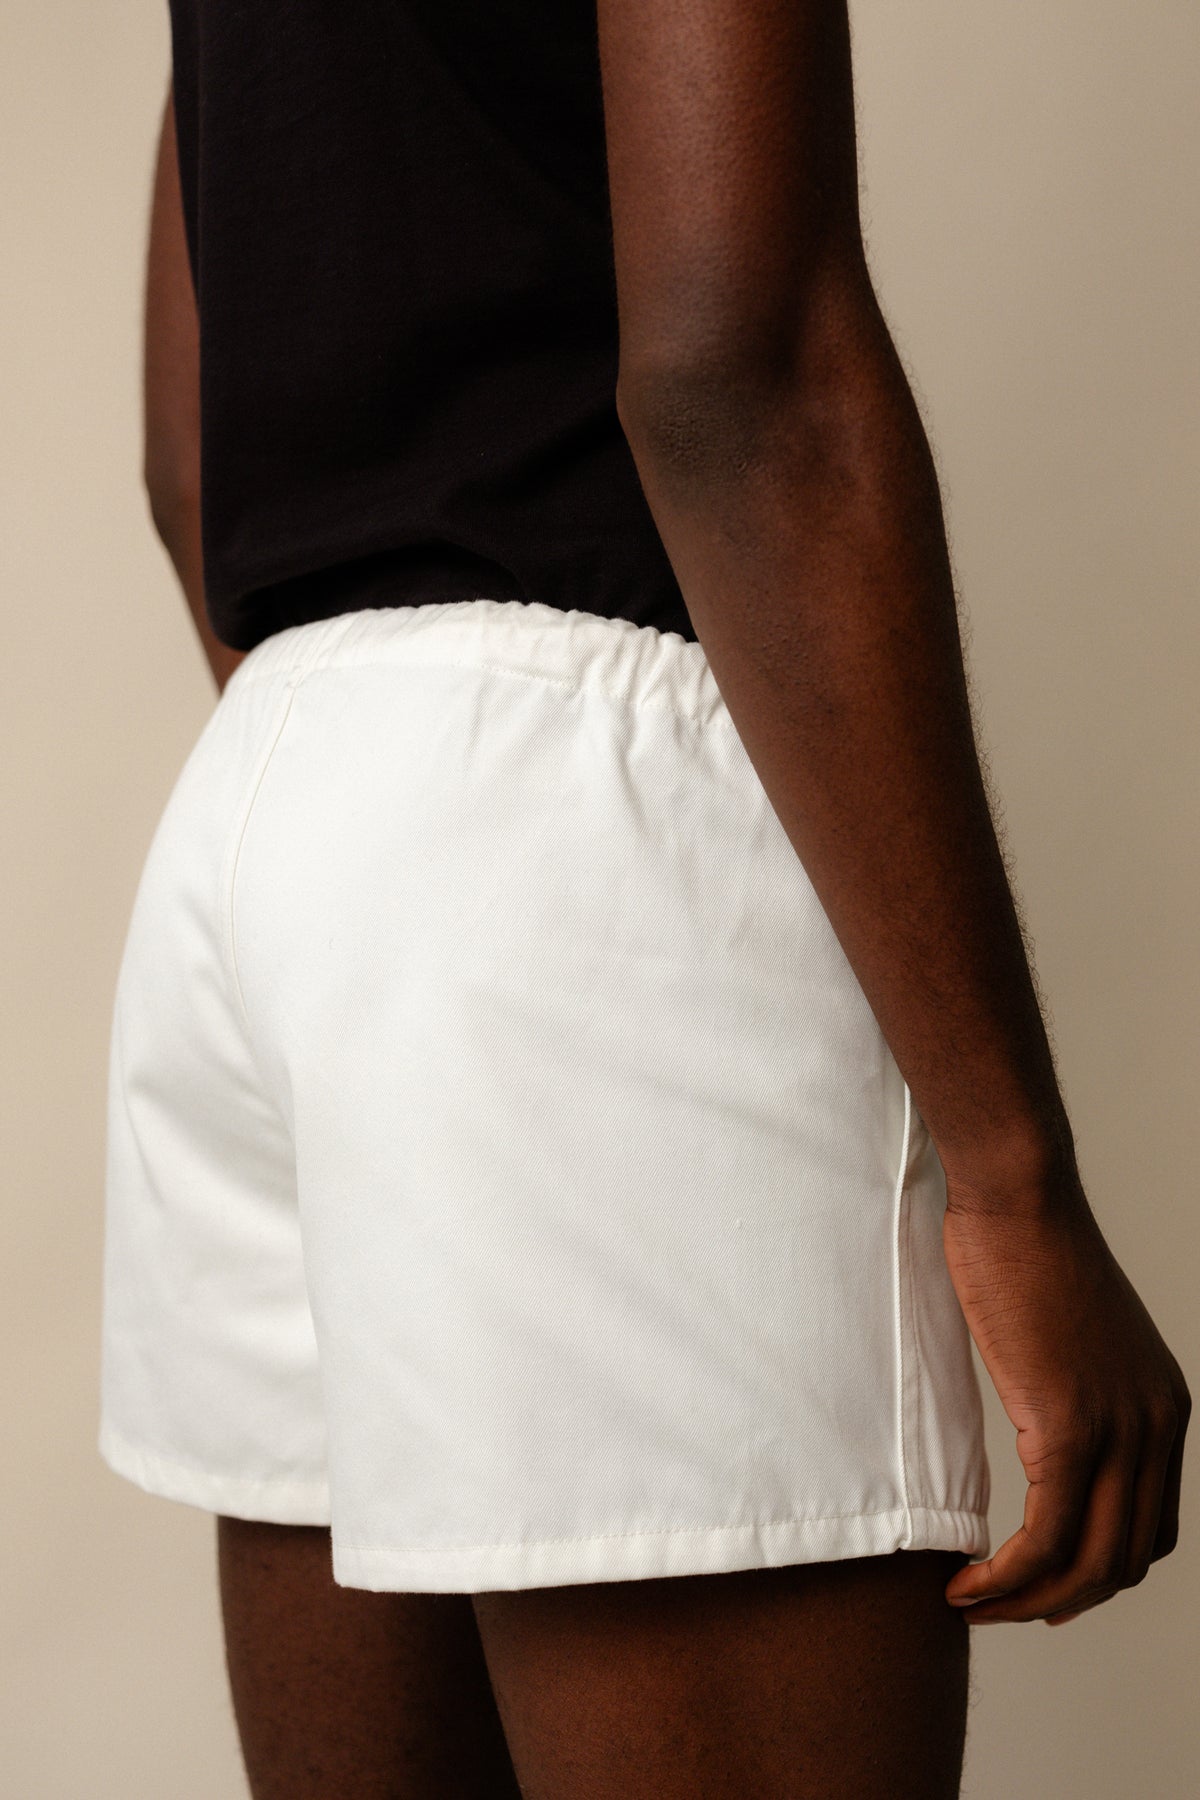 
            Male from behind wearing heavyweight sports short plastic free in white showing elasticated waistband